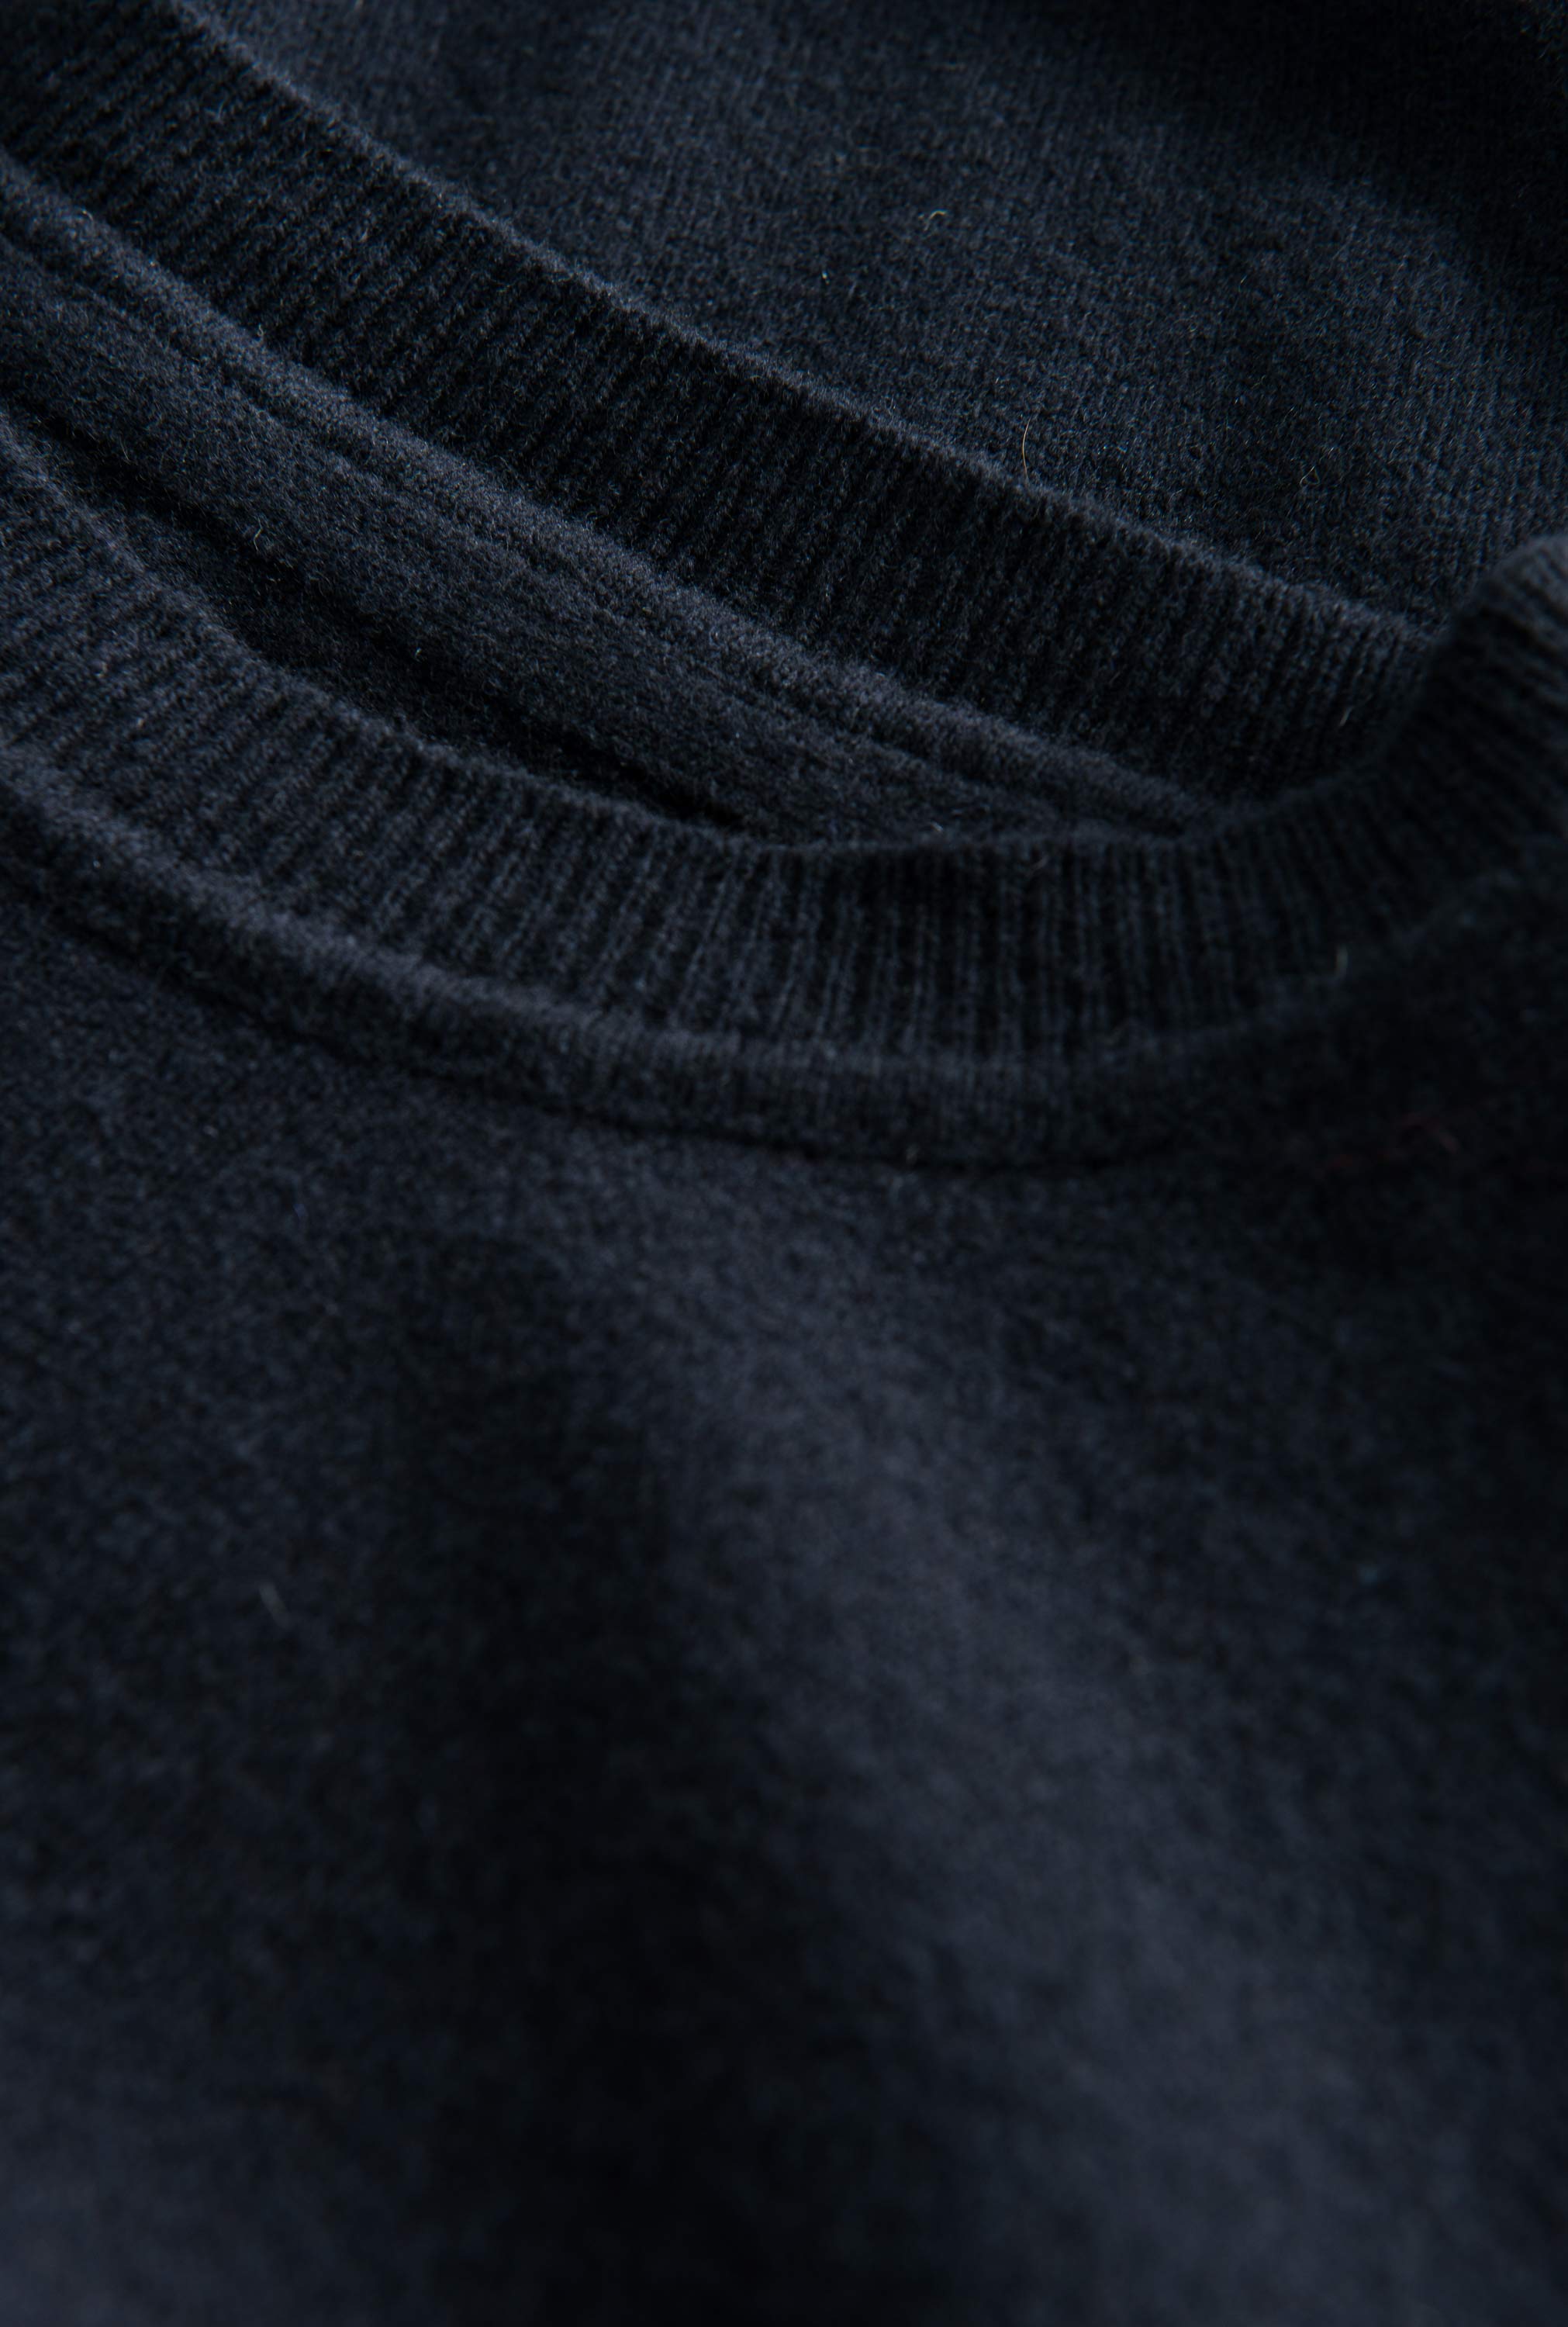 Double A by Wood Wood Sid crewneck Navy | WoodWood.com